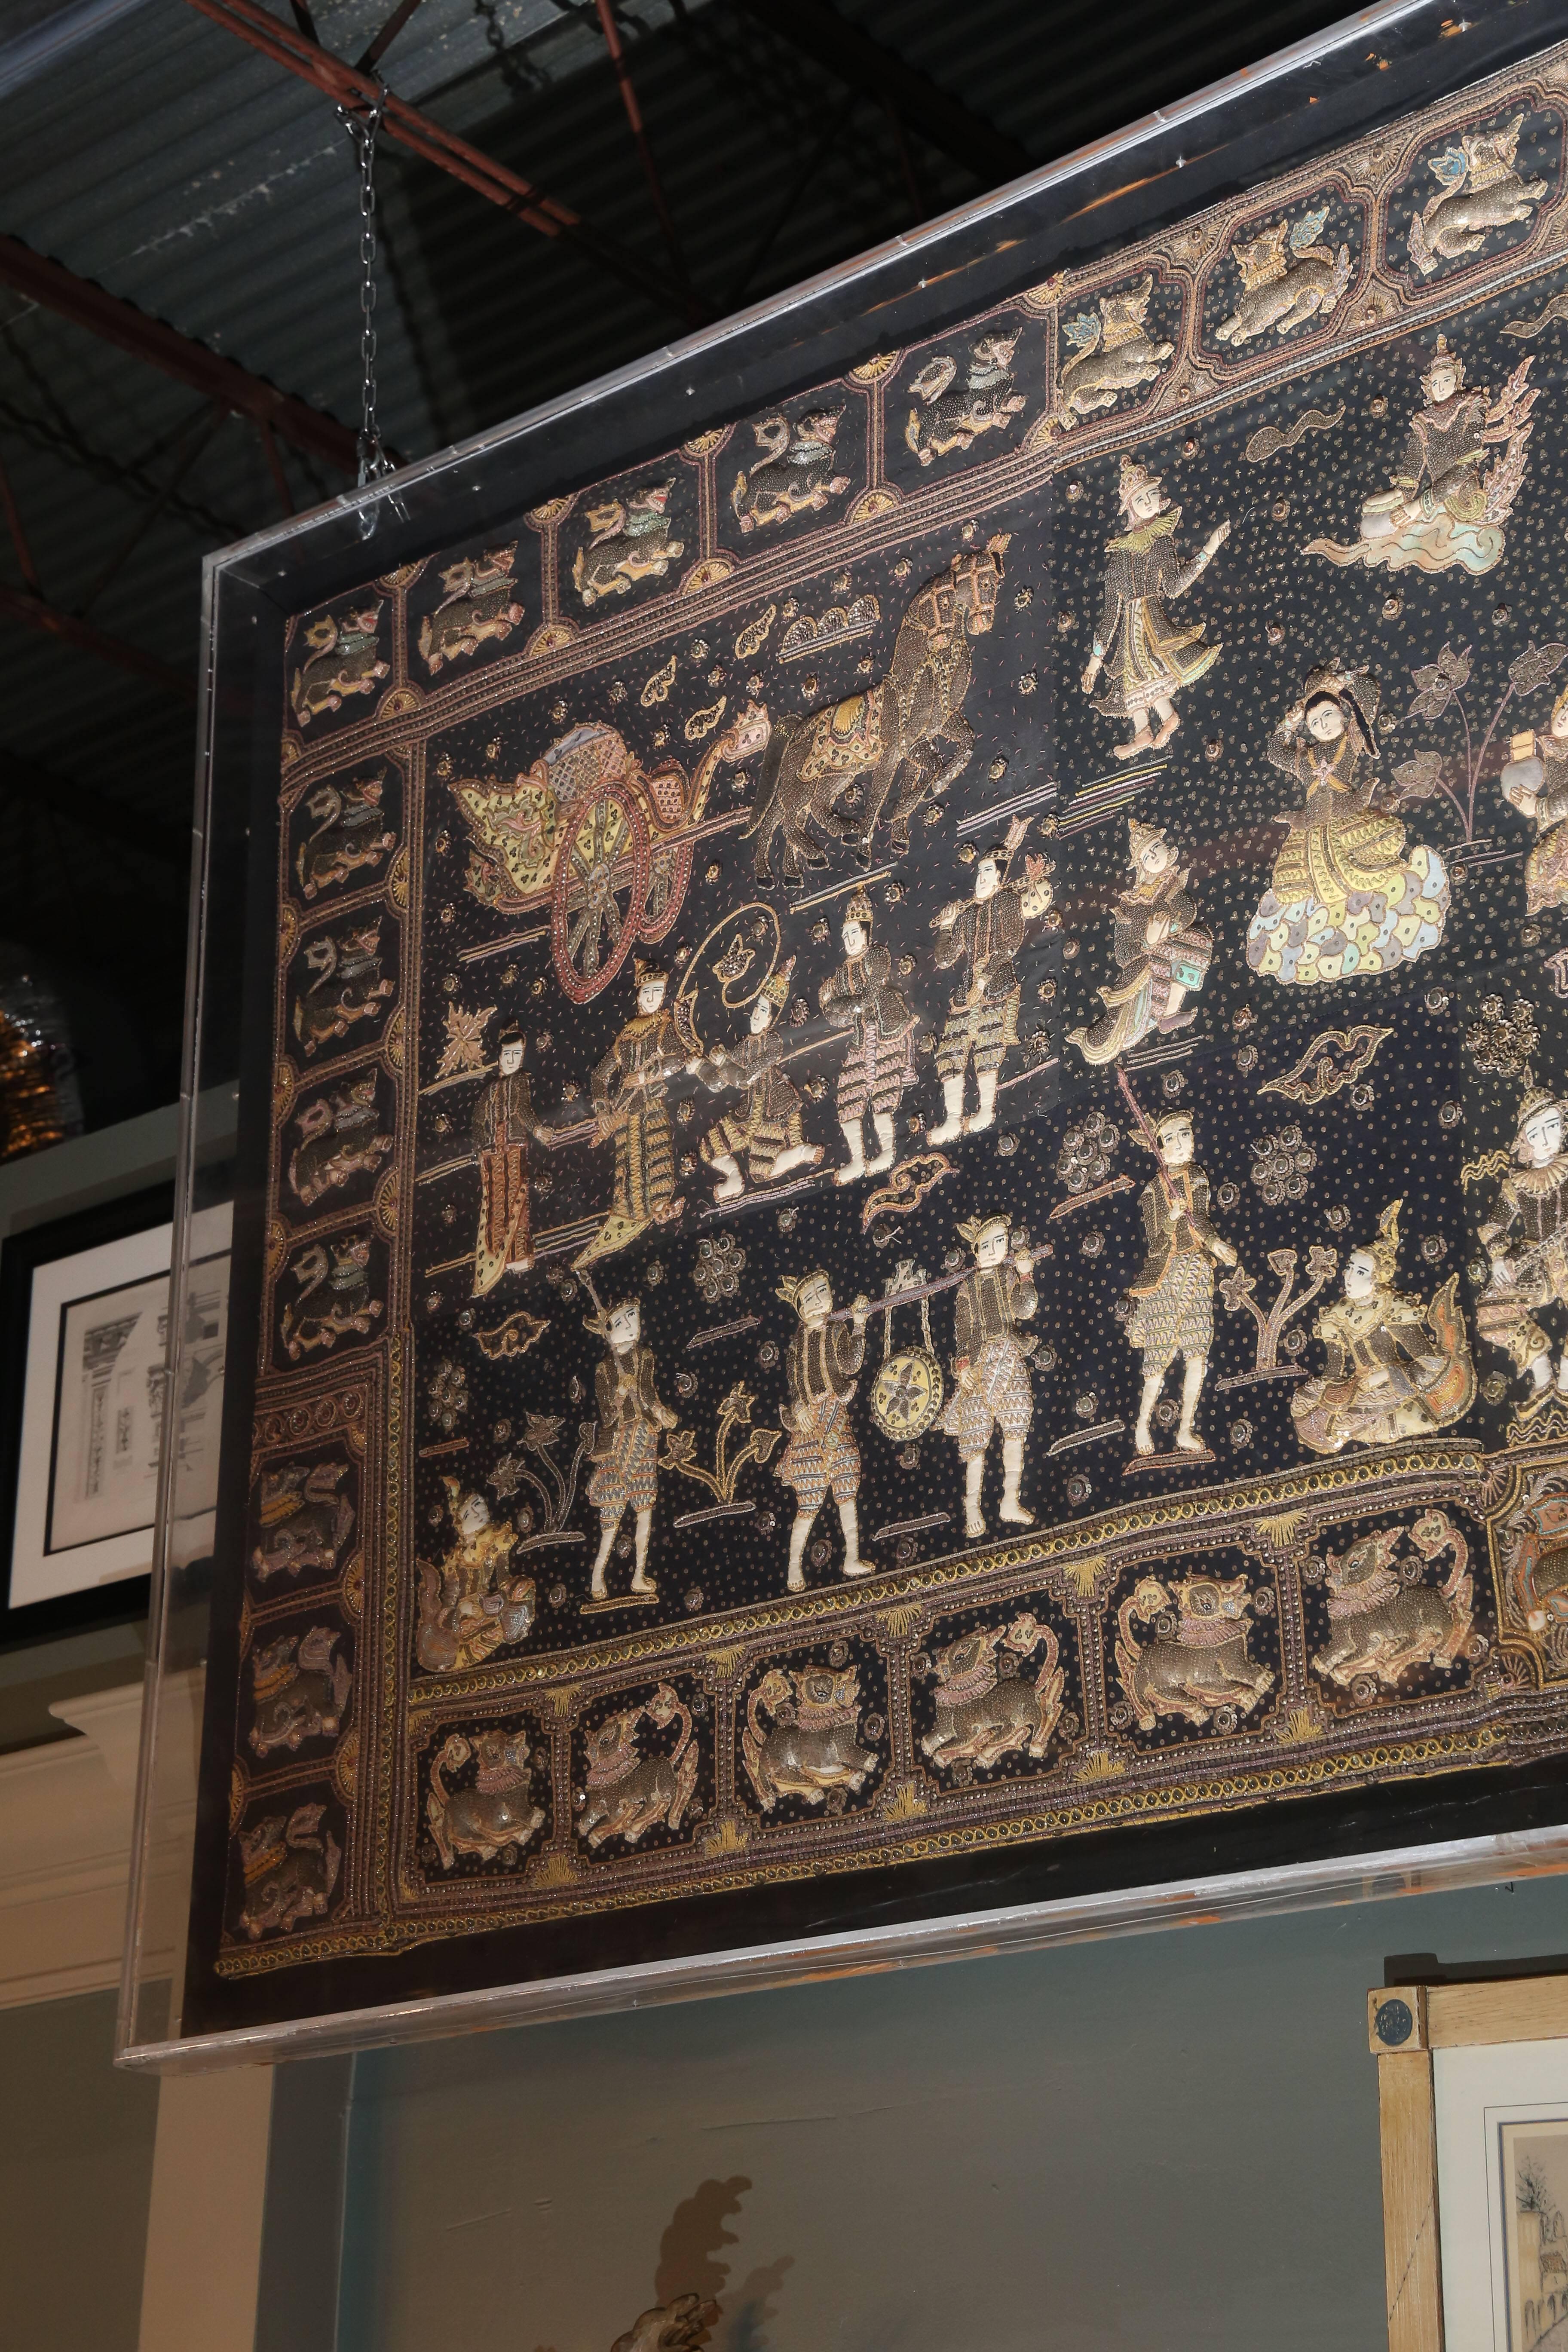 "Kalaga" is the name for embroidered tapestries from Burma.
They are traditionally made of linen, silk, velvet, and cotton, and adorned with stones, beads  and sequins.

They commonly depict the Journeys of Buddha towards Enlightenment